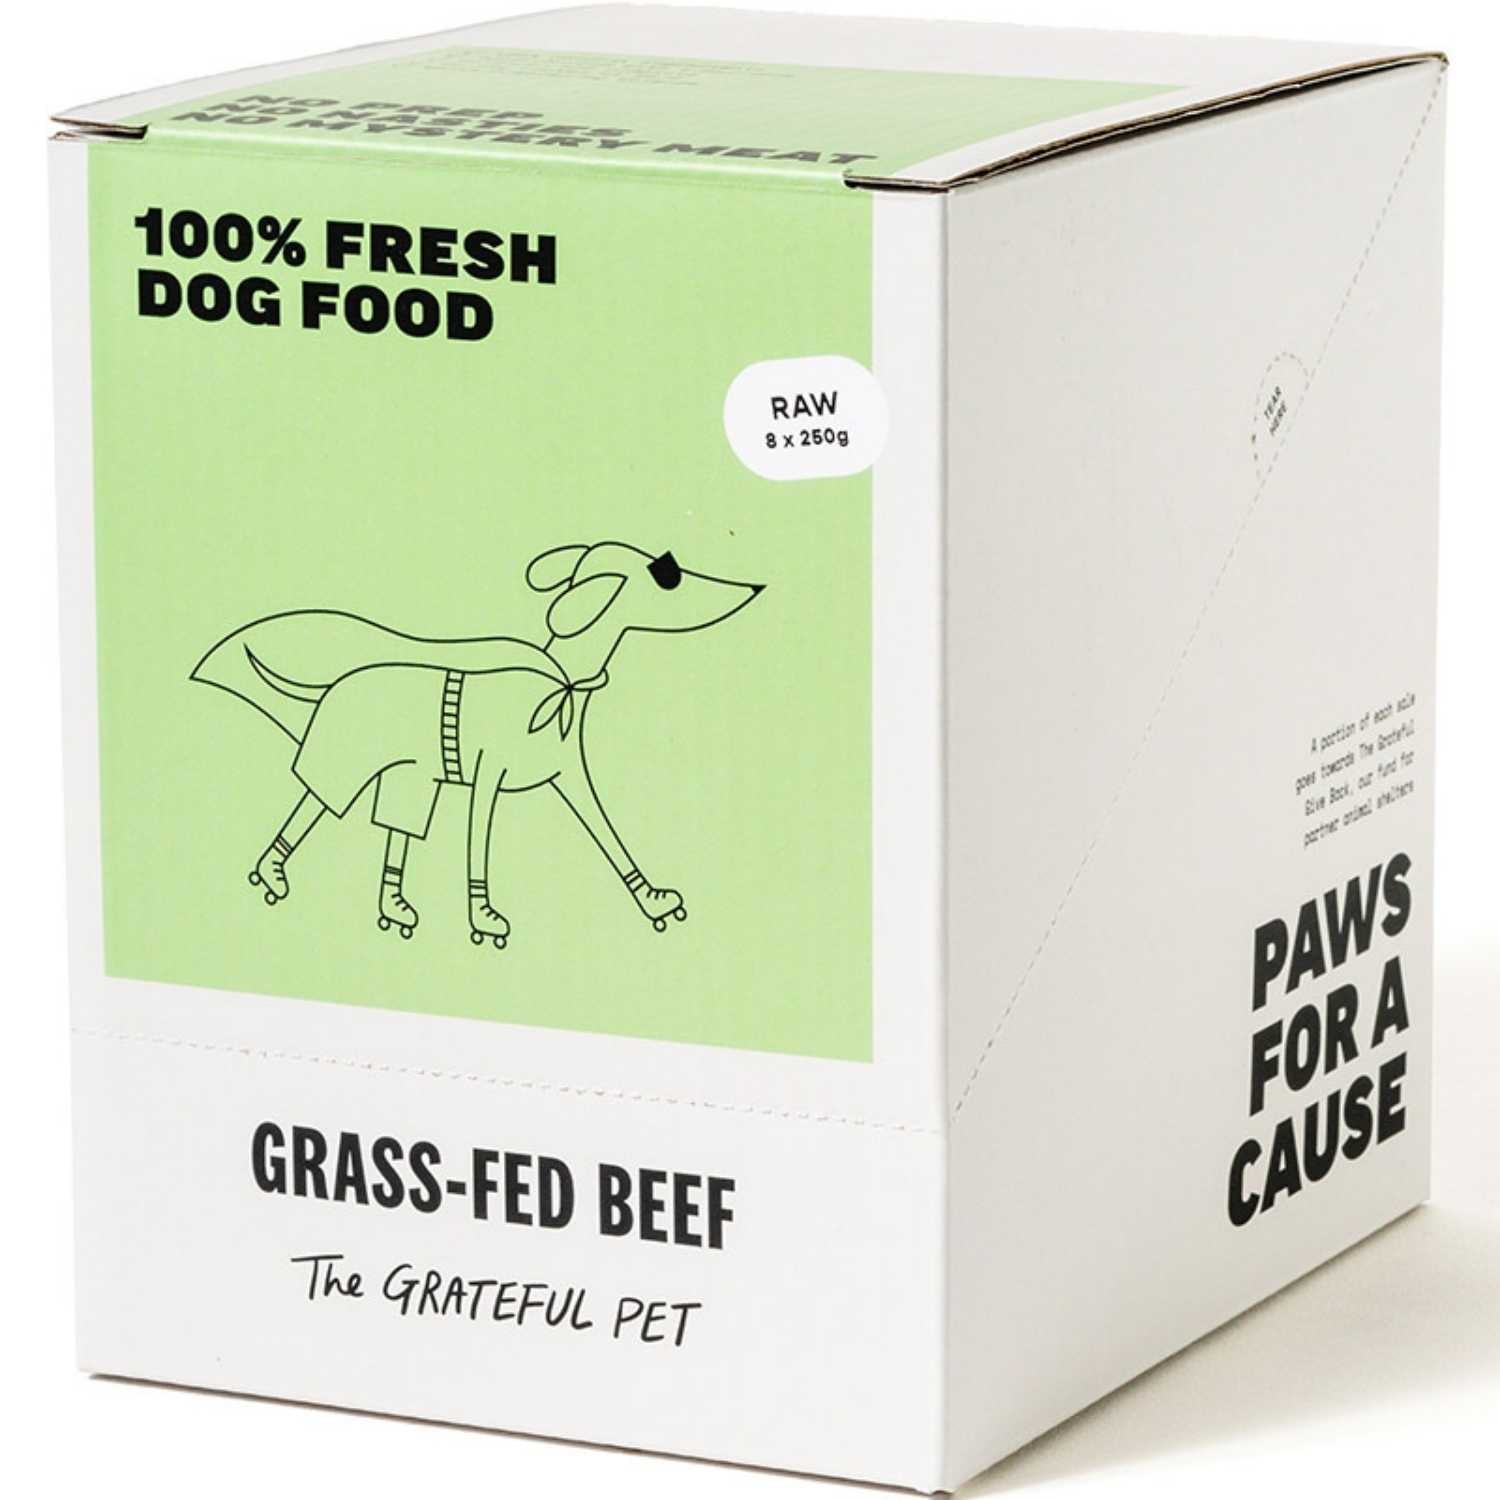 The Grateful Pet - Raw (Grass-Fed Beef) - Dog (8 x 250g Pouch) Food (Case)